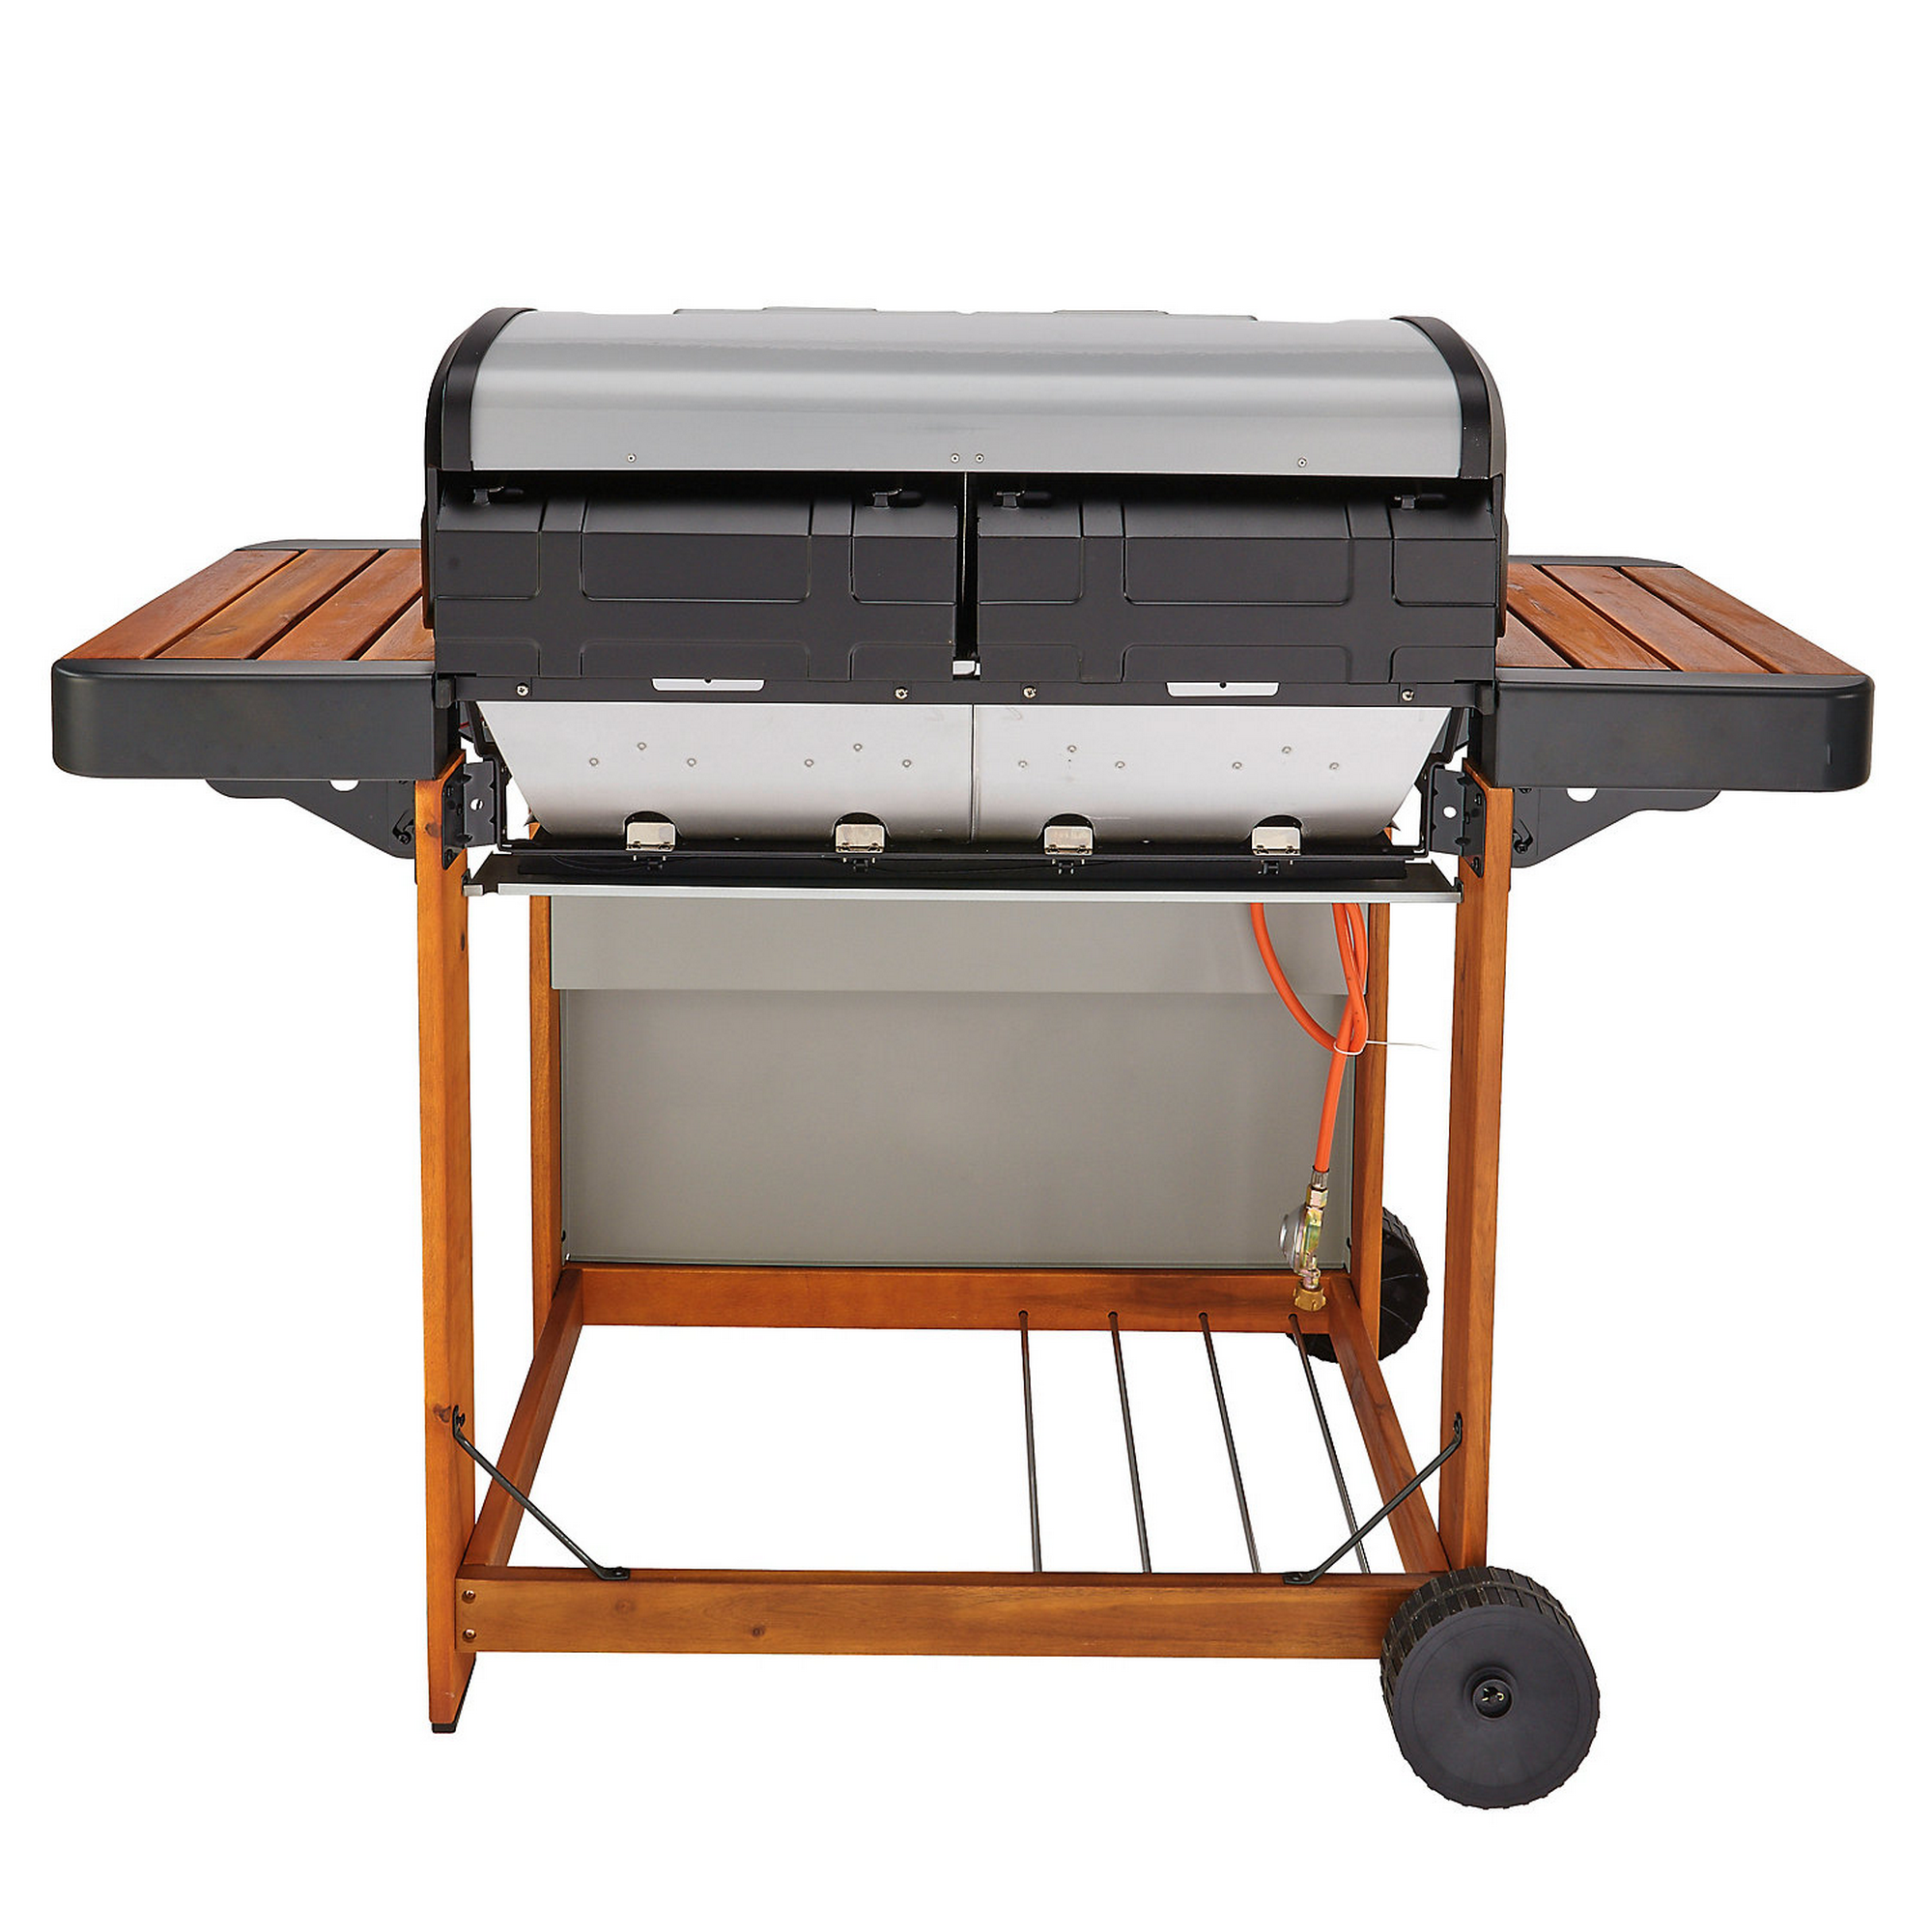 Gasgrill '4 Series Dual Heat Woody LX' silber/holz + product picture